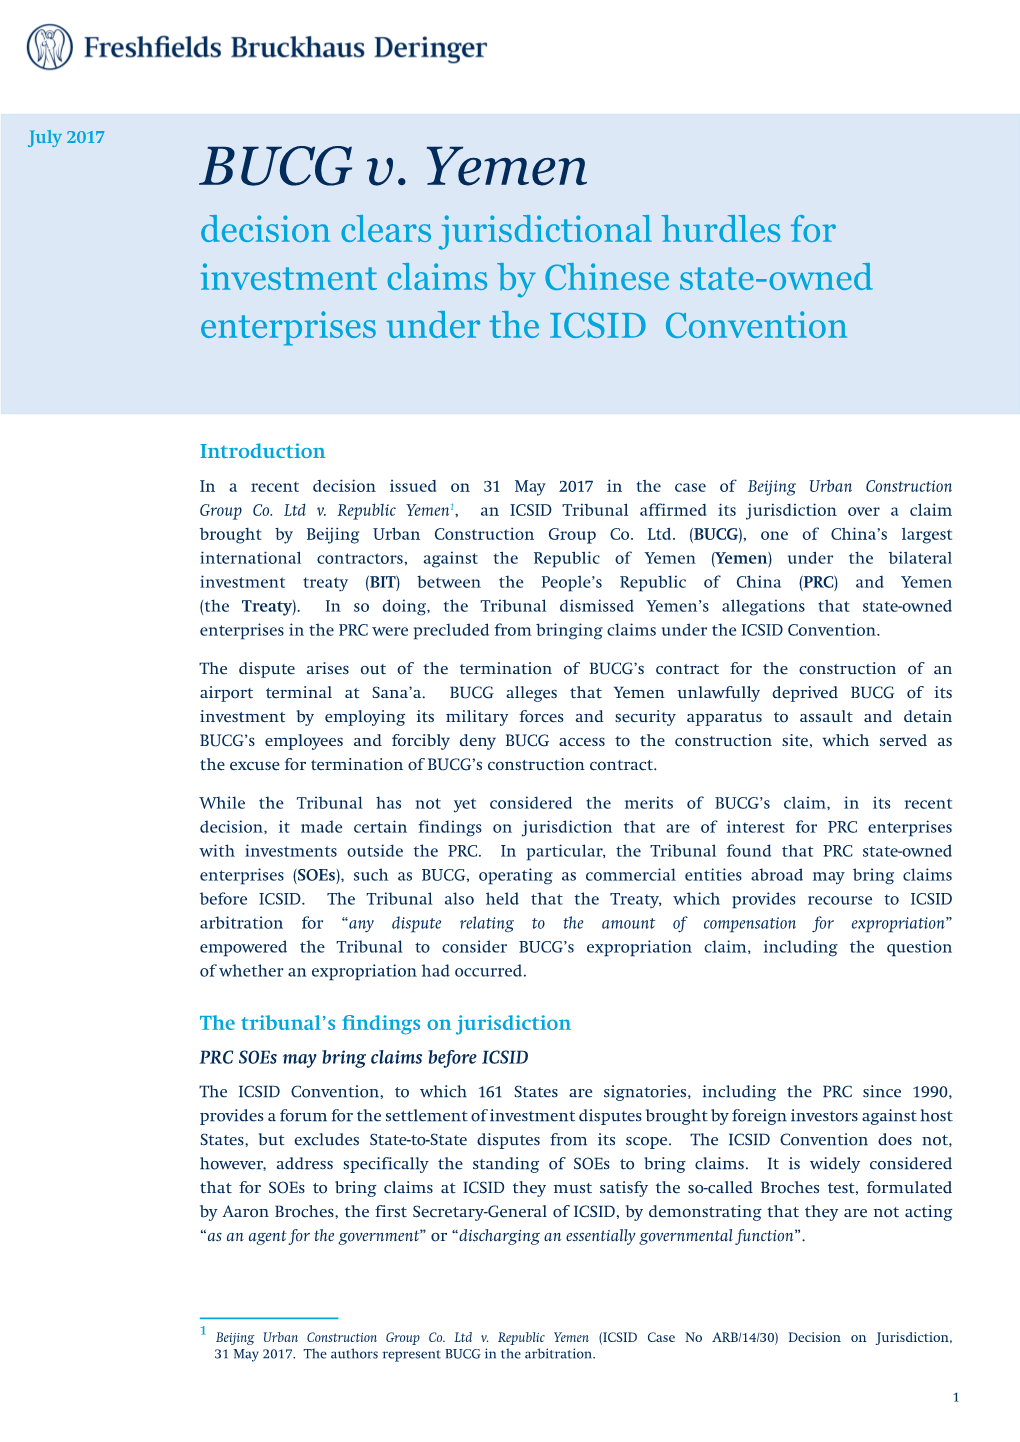 BUCG V. Yemen Decision Clears Jurisdictional Hurdles for Investment Claims by Chinese State-Owned Enterprises Under the ICSID Convention